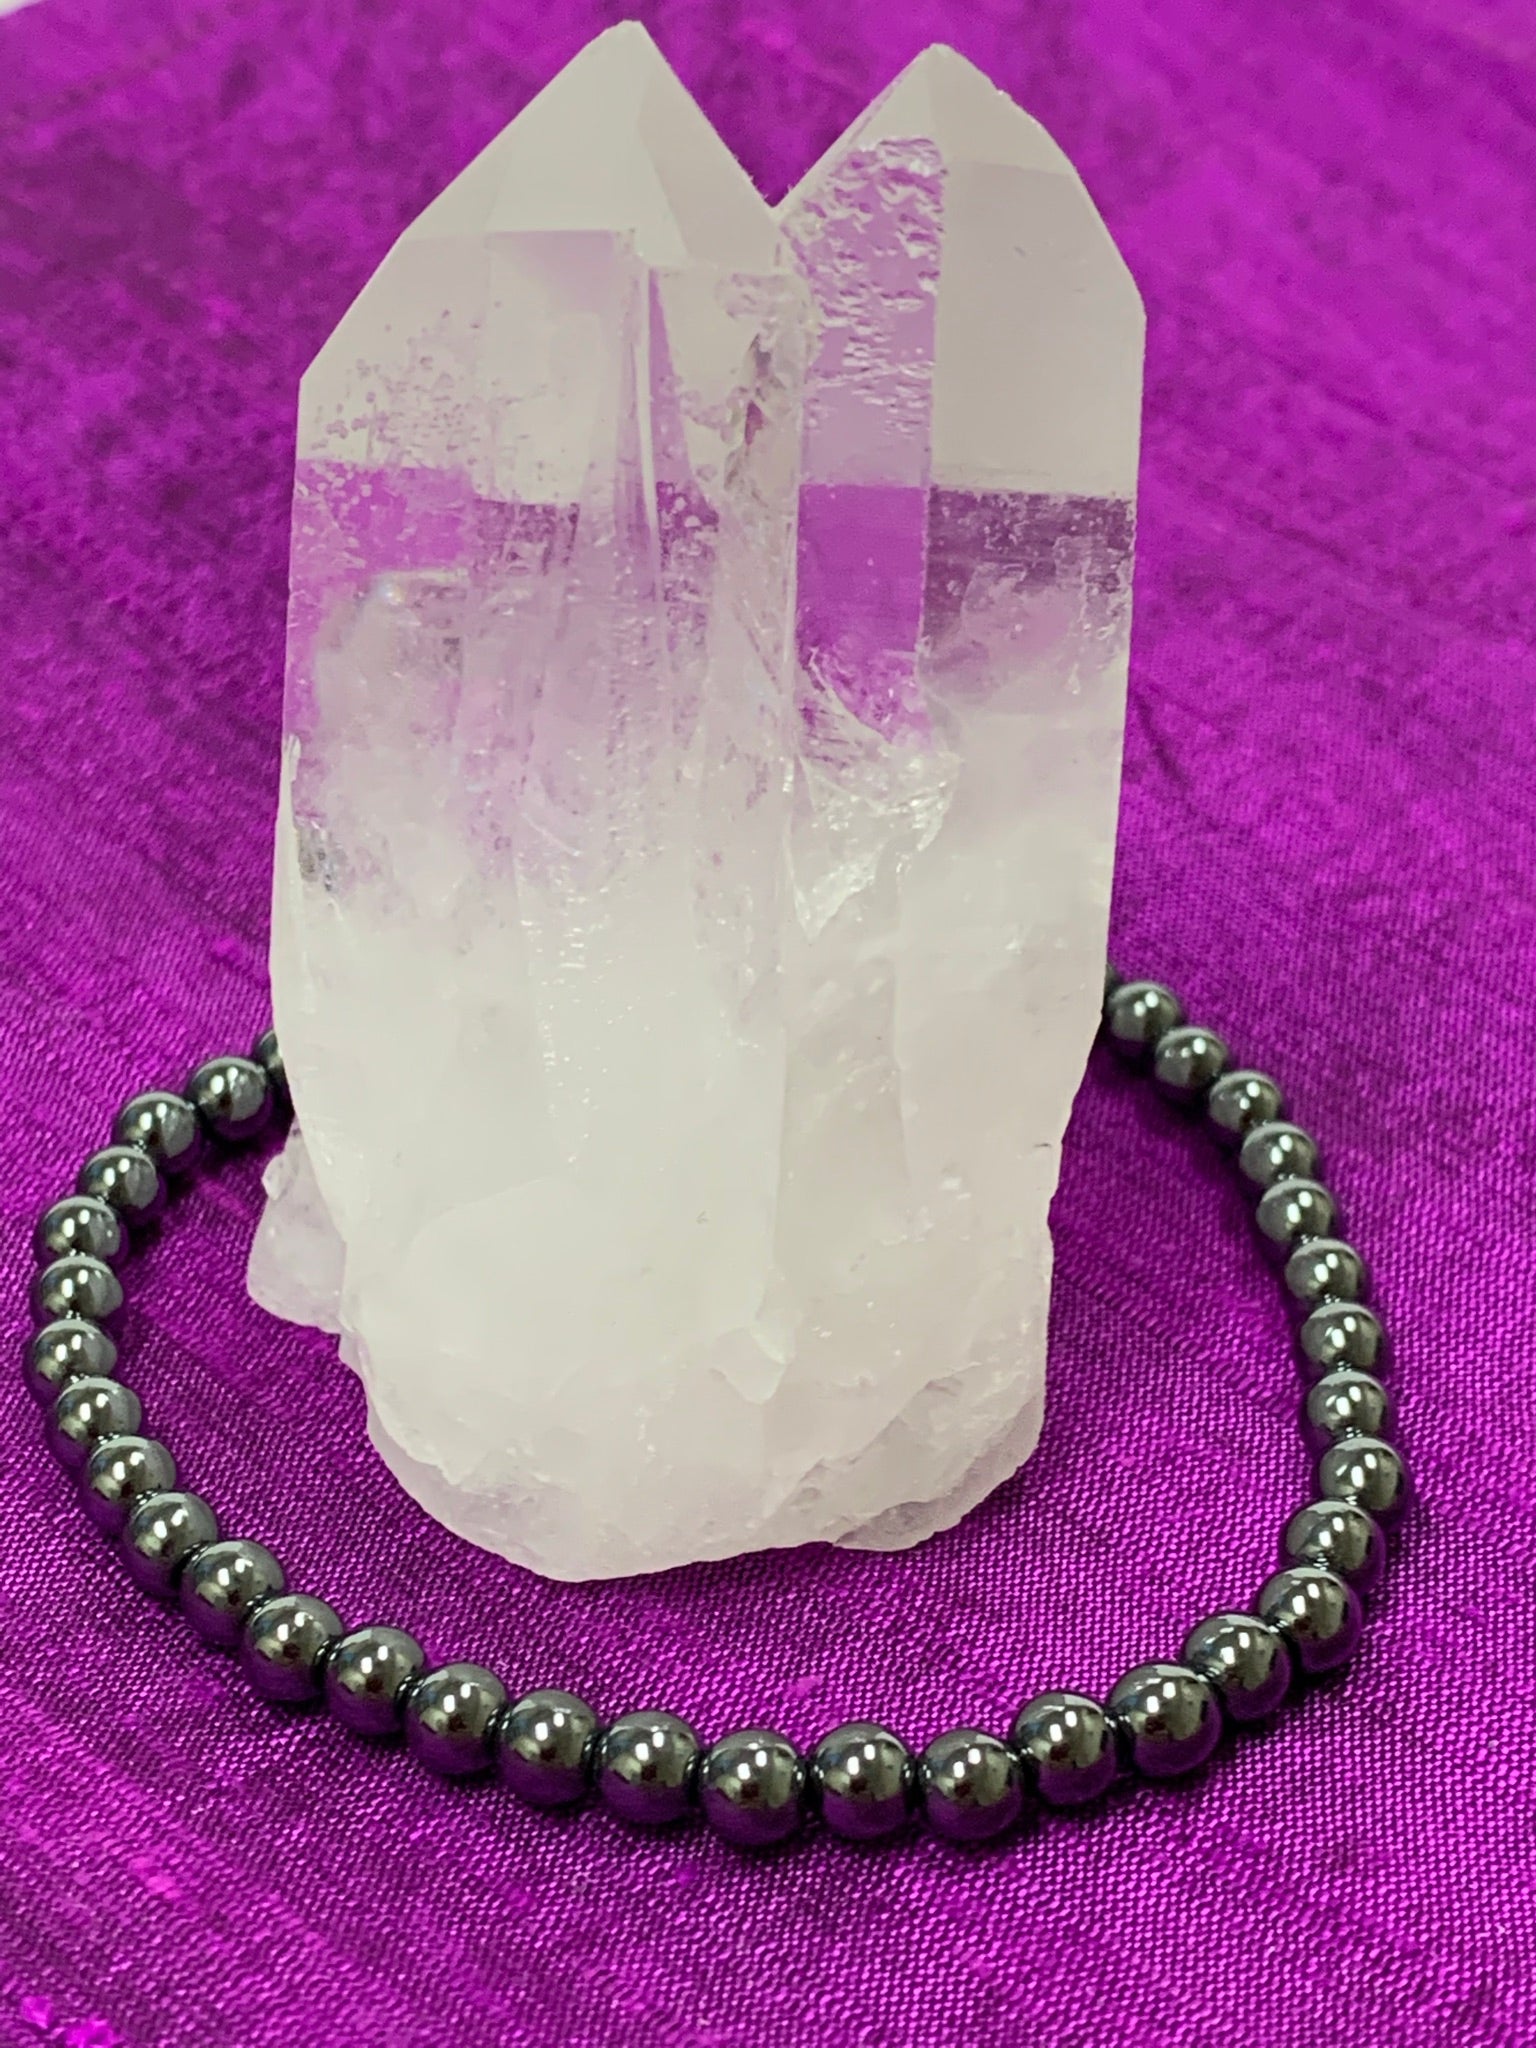 Second close-up view. Hematite gemstone power bracelet. Bead size is 4mm. Tiny but mighty, this bracelet puts the power of hematite right around your wrist. Buy one or buy a bunch and wear and share with family and friends - we have a variety of gemstone bracelet choices.